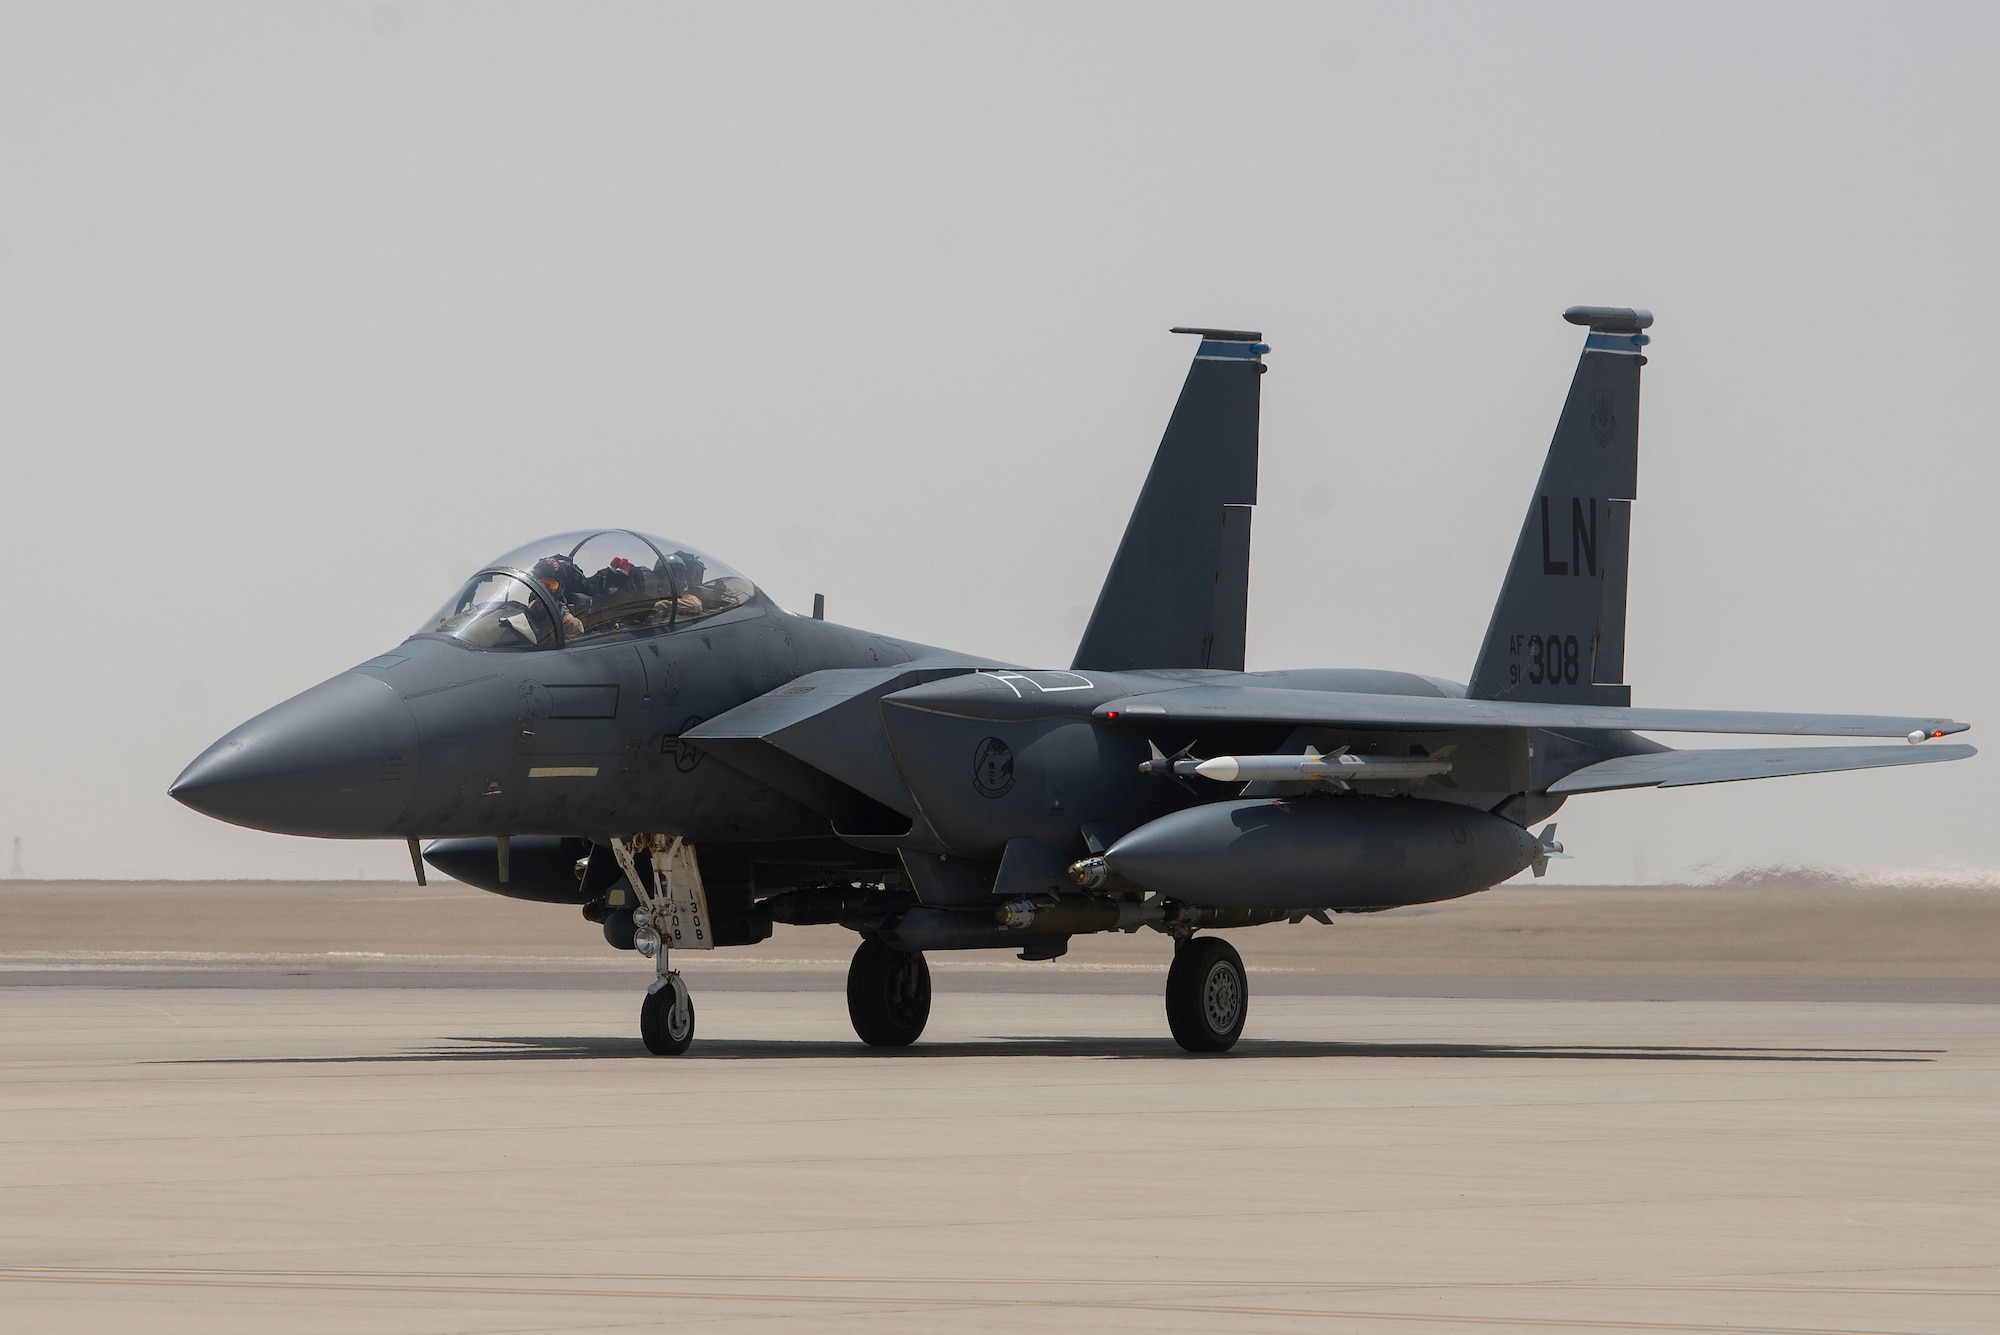 An F-15E Strike Eagle piloted by a member of the 494th Expeditionary Fighter Squadron (EFS) taxis on the flightline after landing at Al Dhafra Air Base, United Arab Emirates, April 25, 2021.